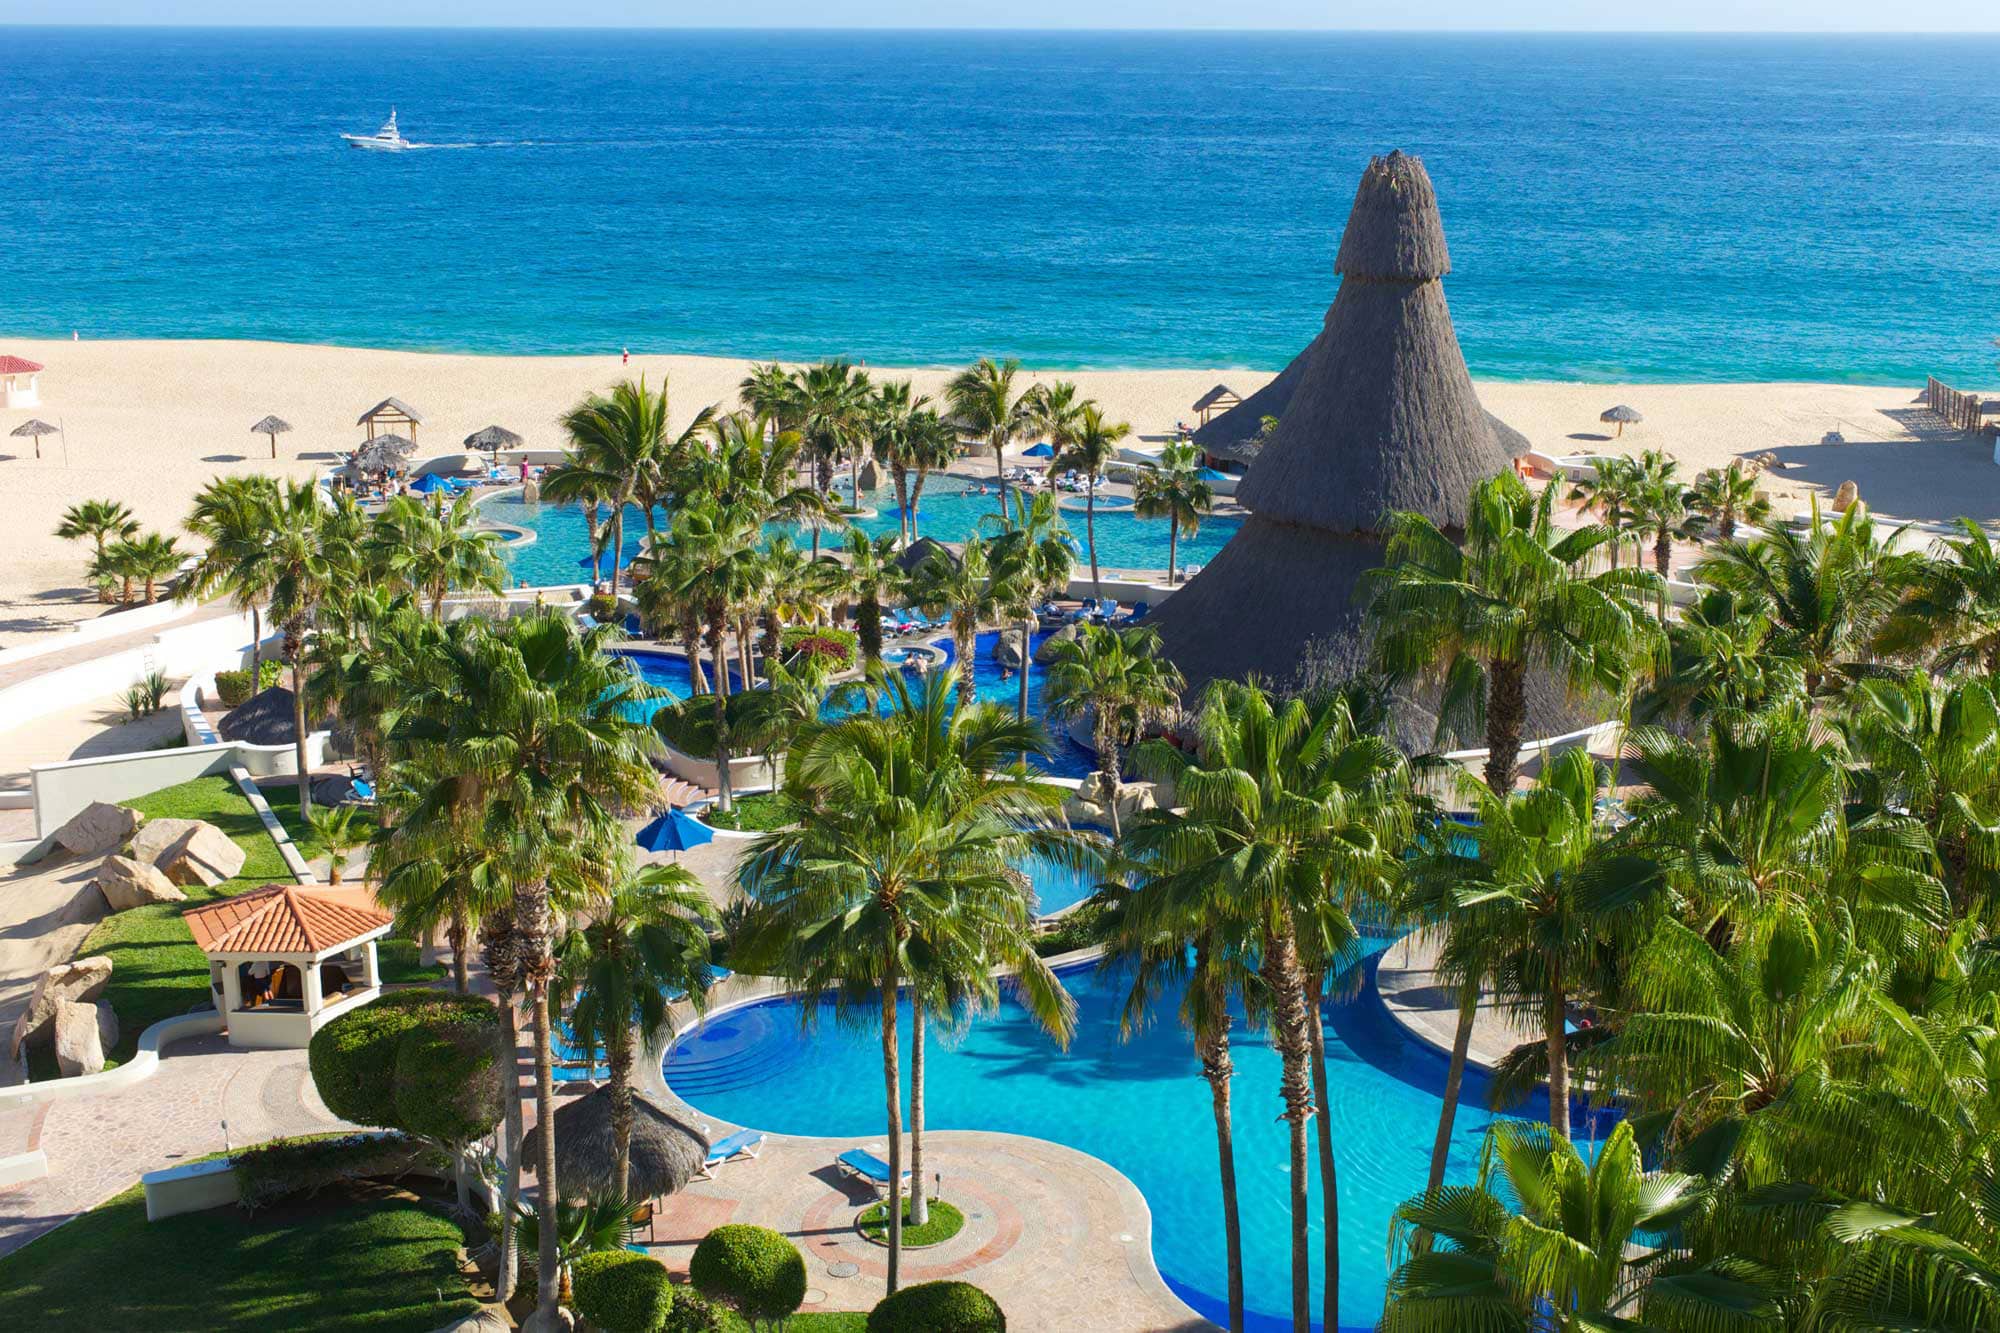 All Inclusive Cheap Honeymoon Deals and Packages: Sandos Finisterra Los Cabos Resort